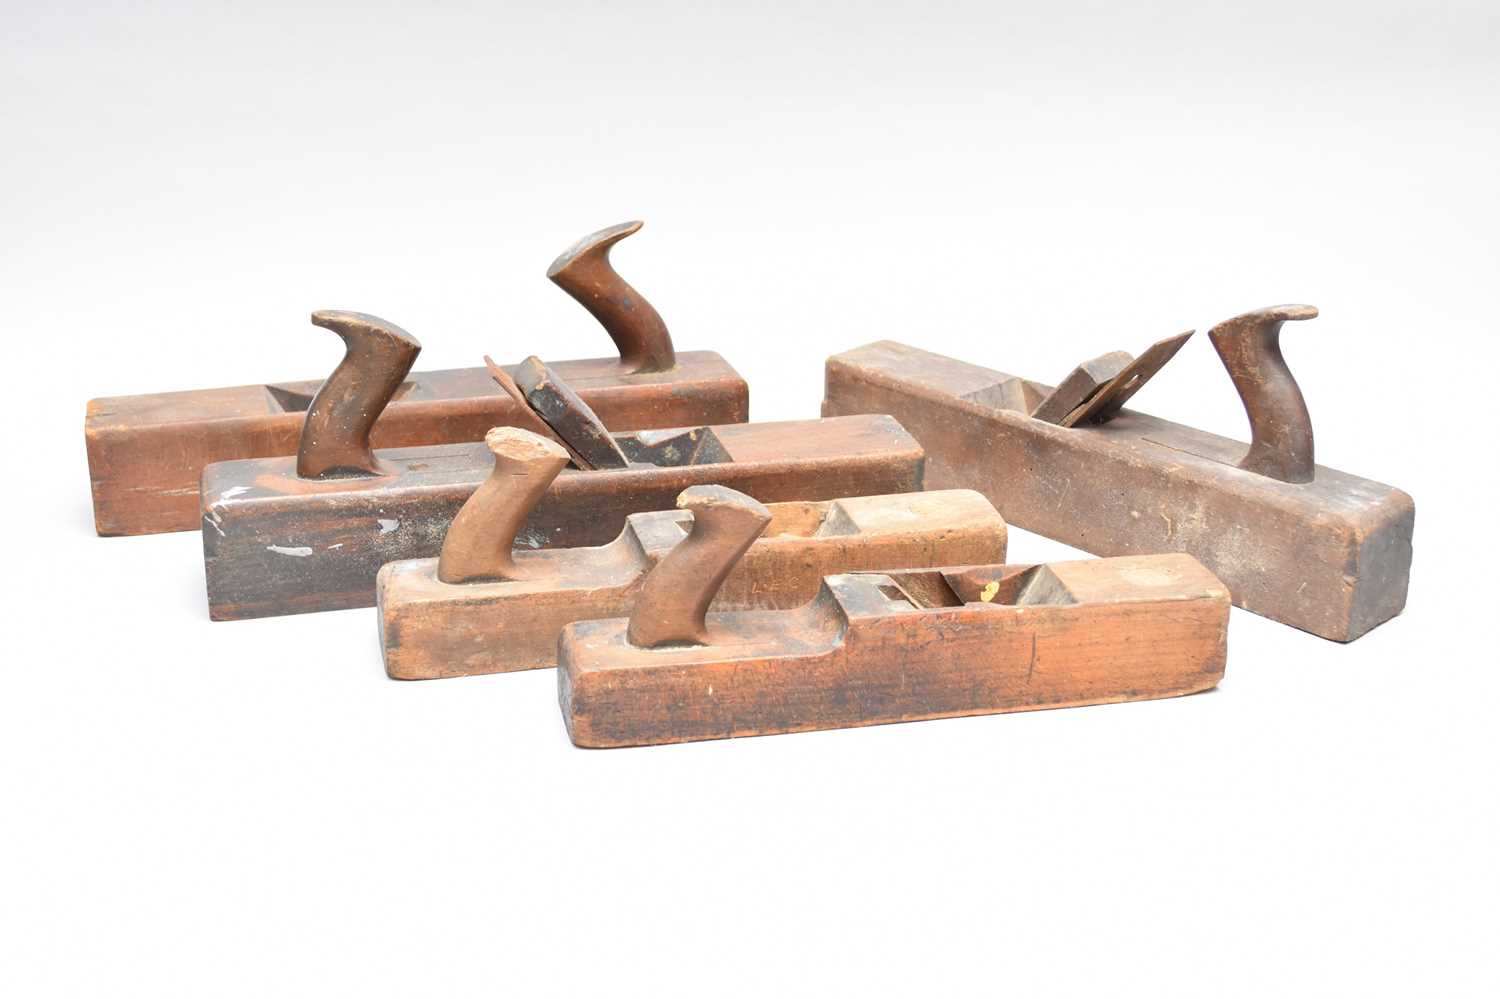 An assembled collection of woodworking planes